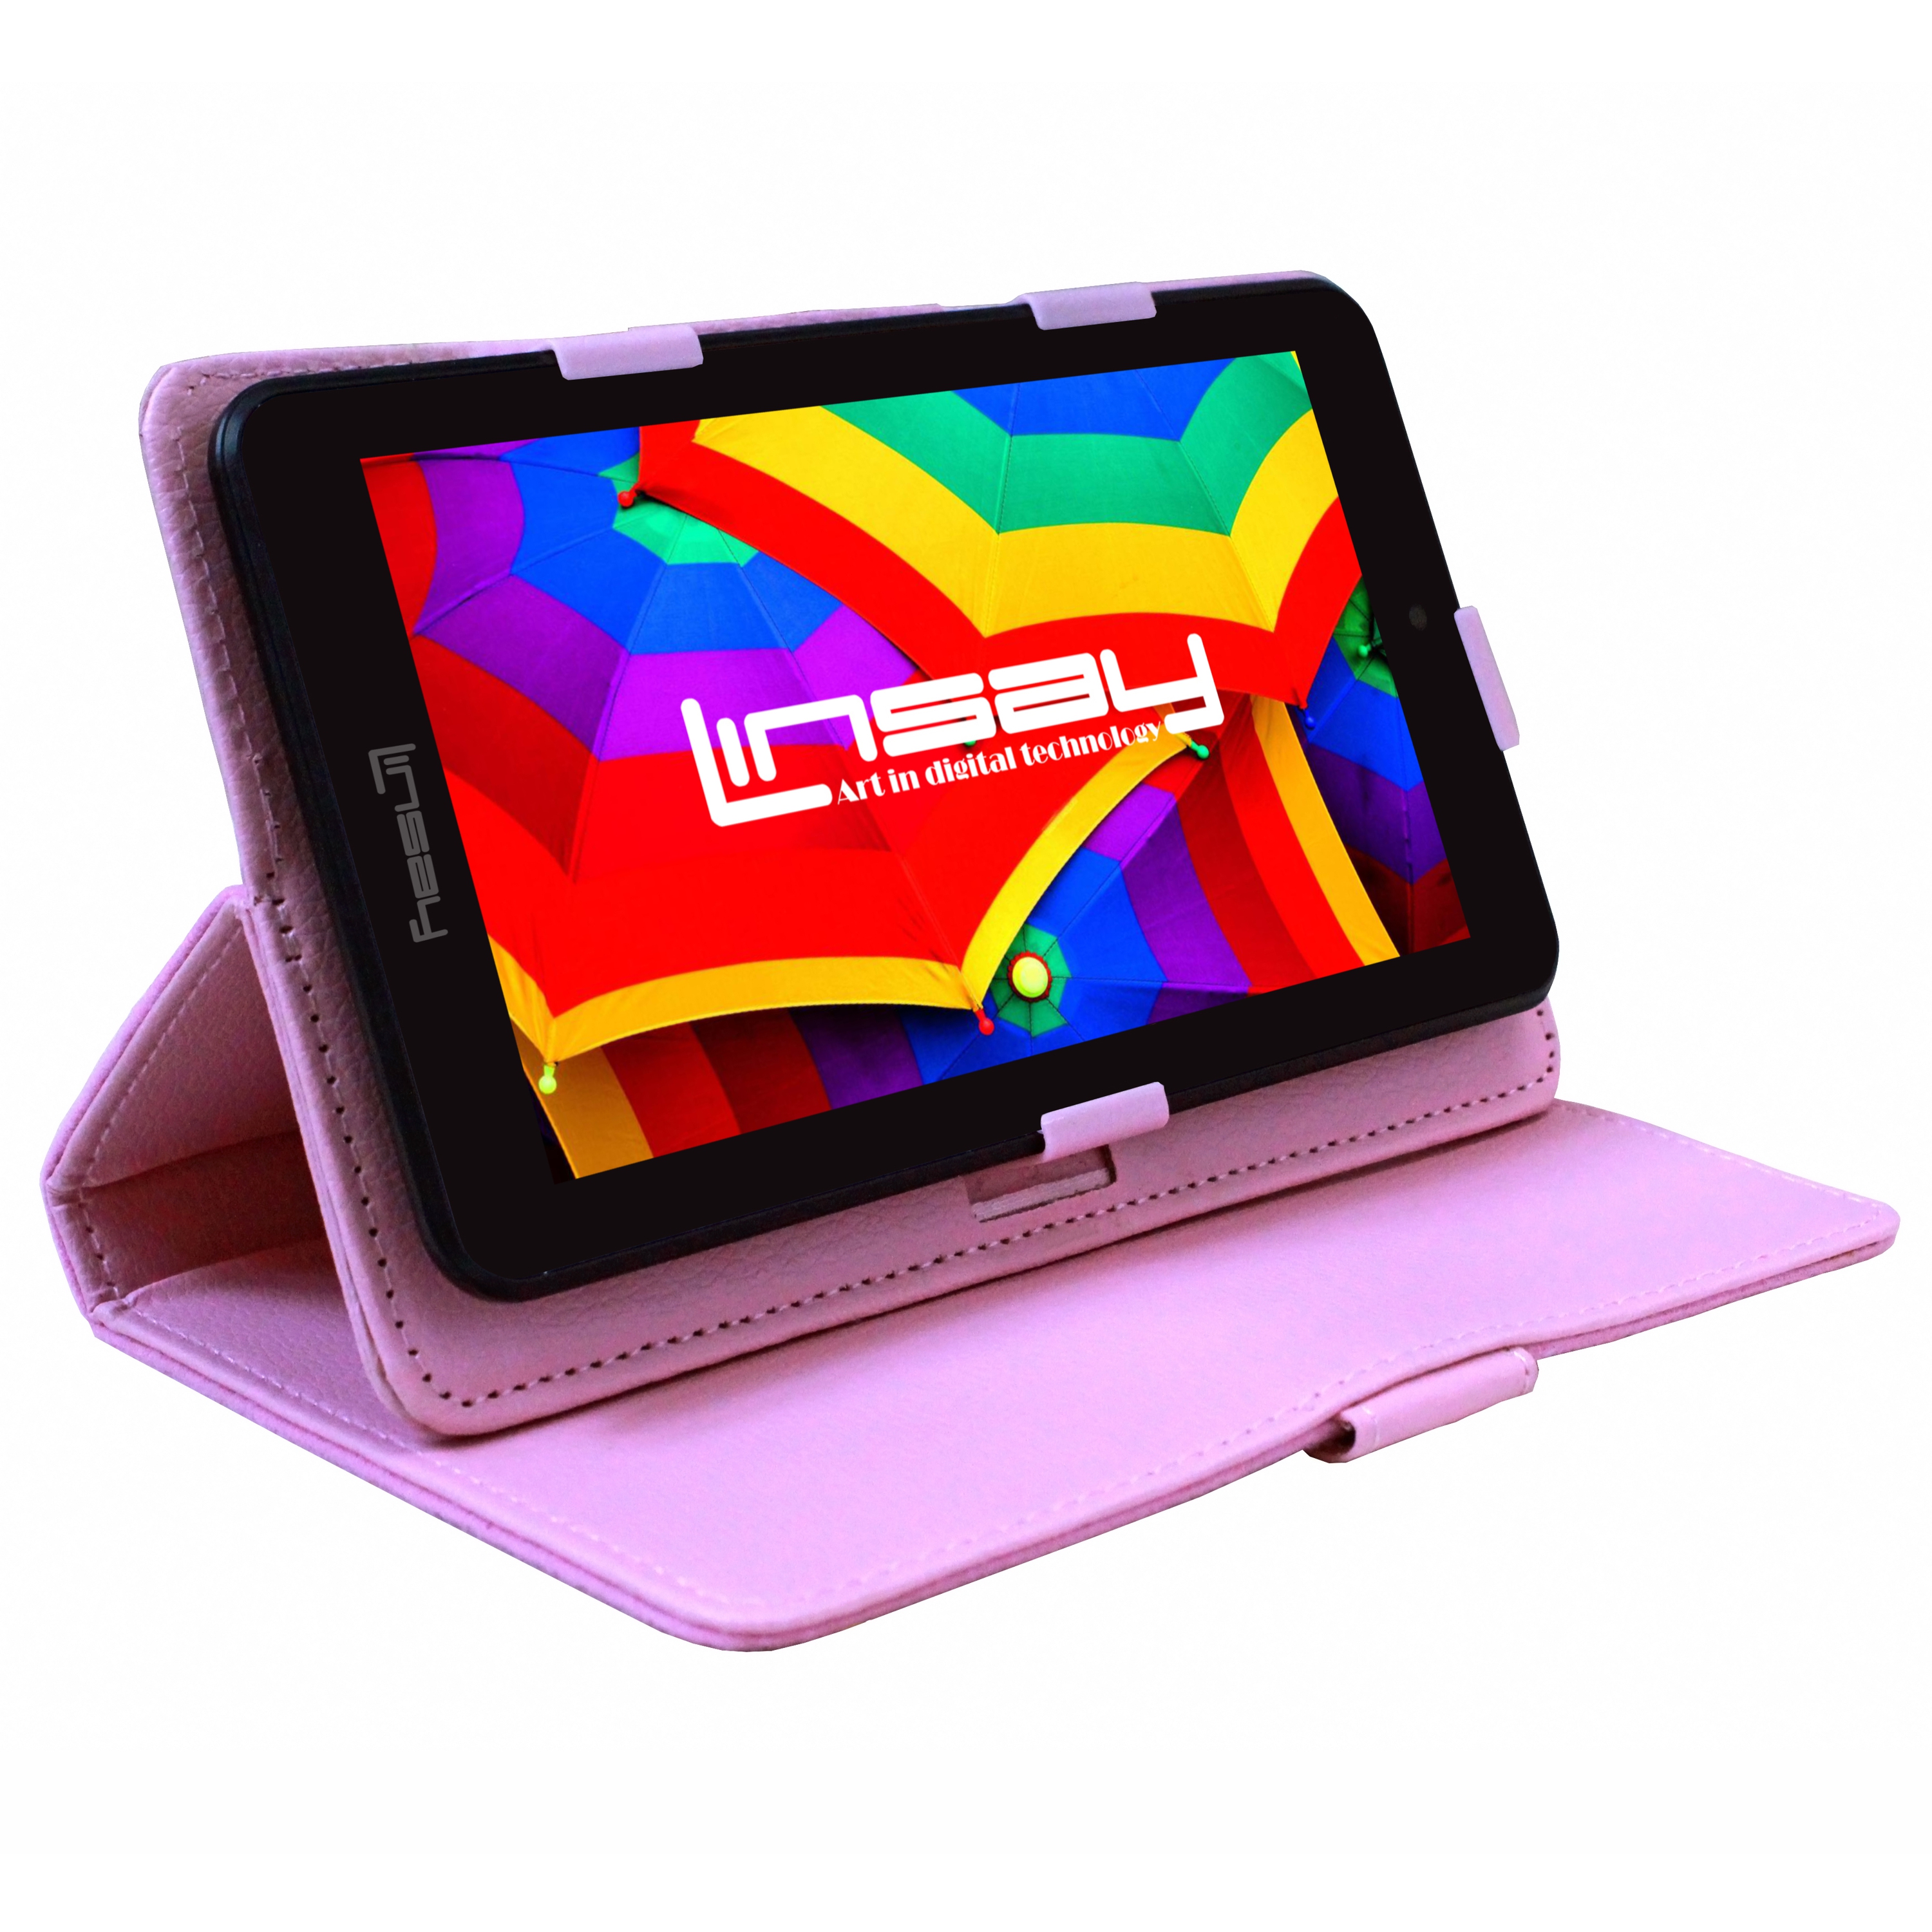 LINSAY 7" Quad Core 2GB RAM 64GB Storage Android 13 WiFi Tablet with Protective Case Purple - image 2 of 6